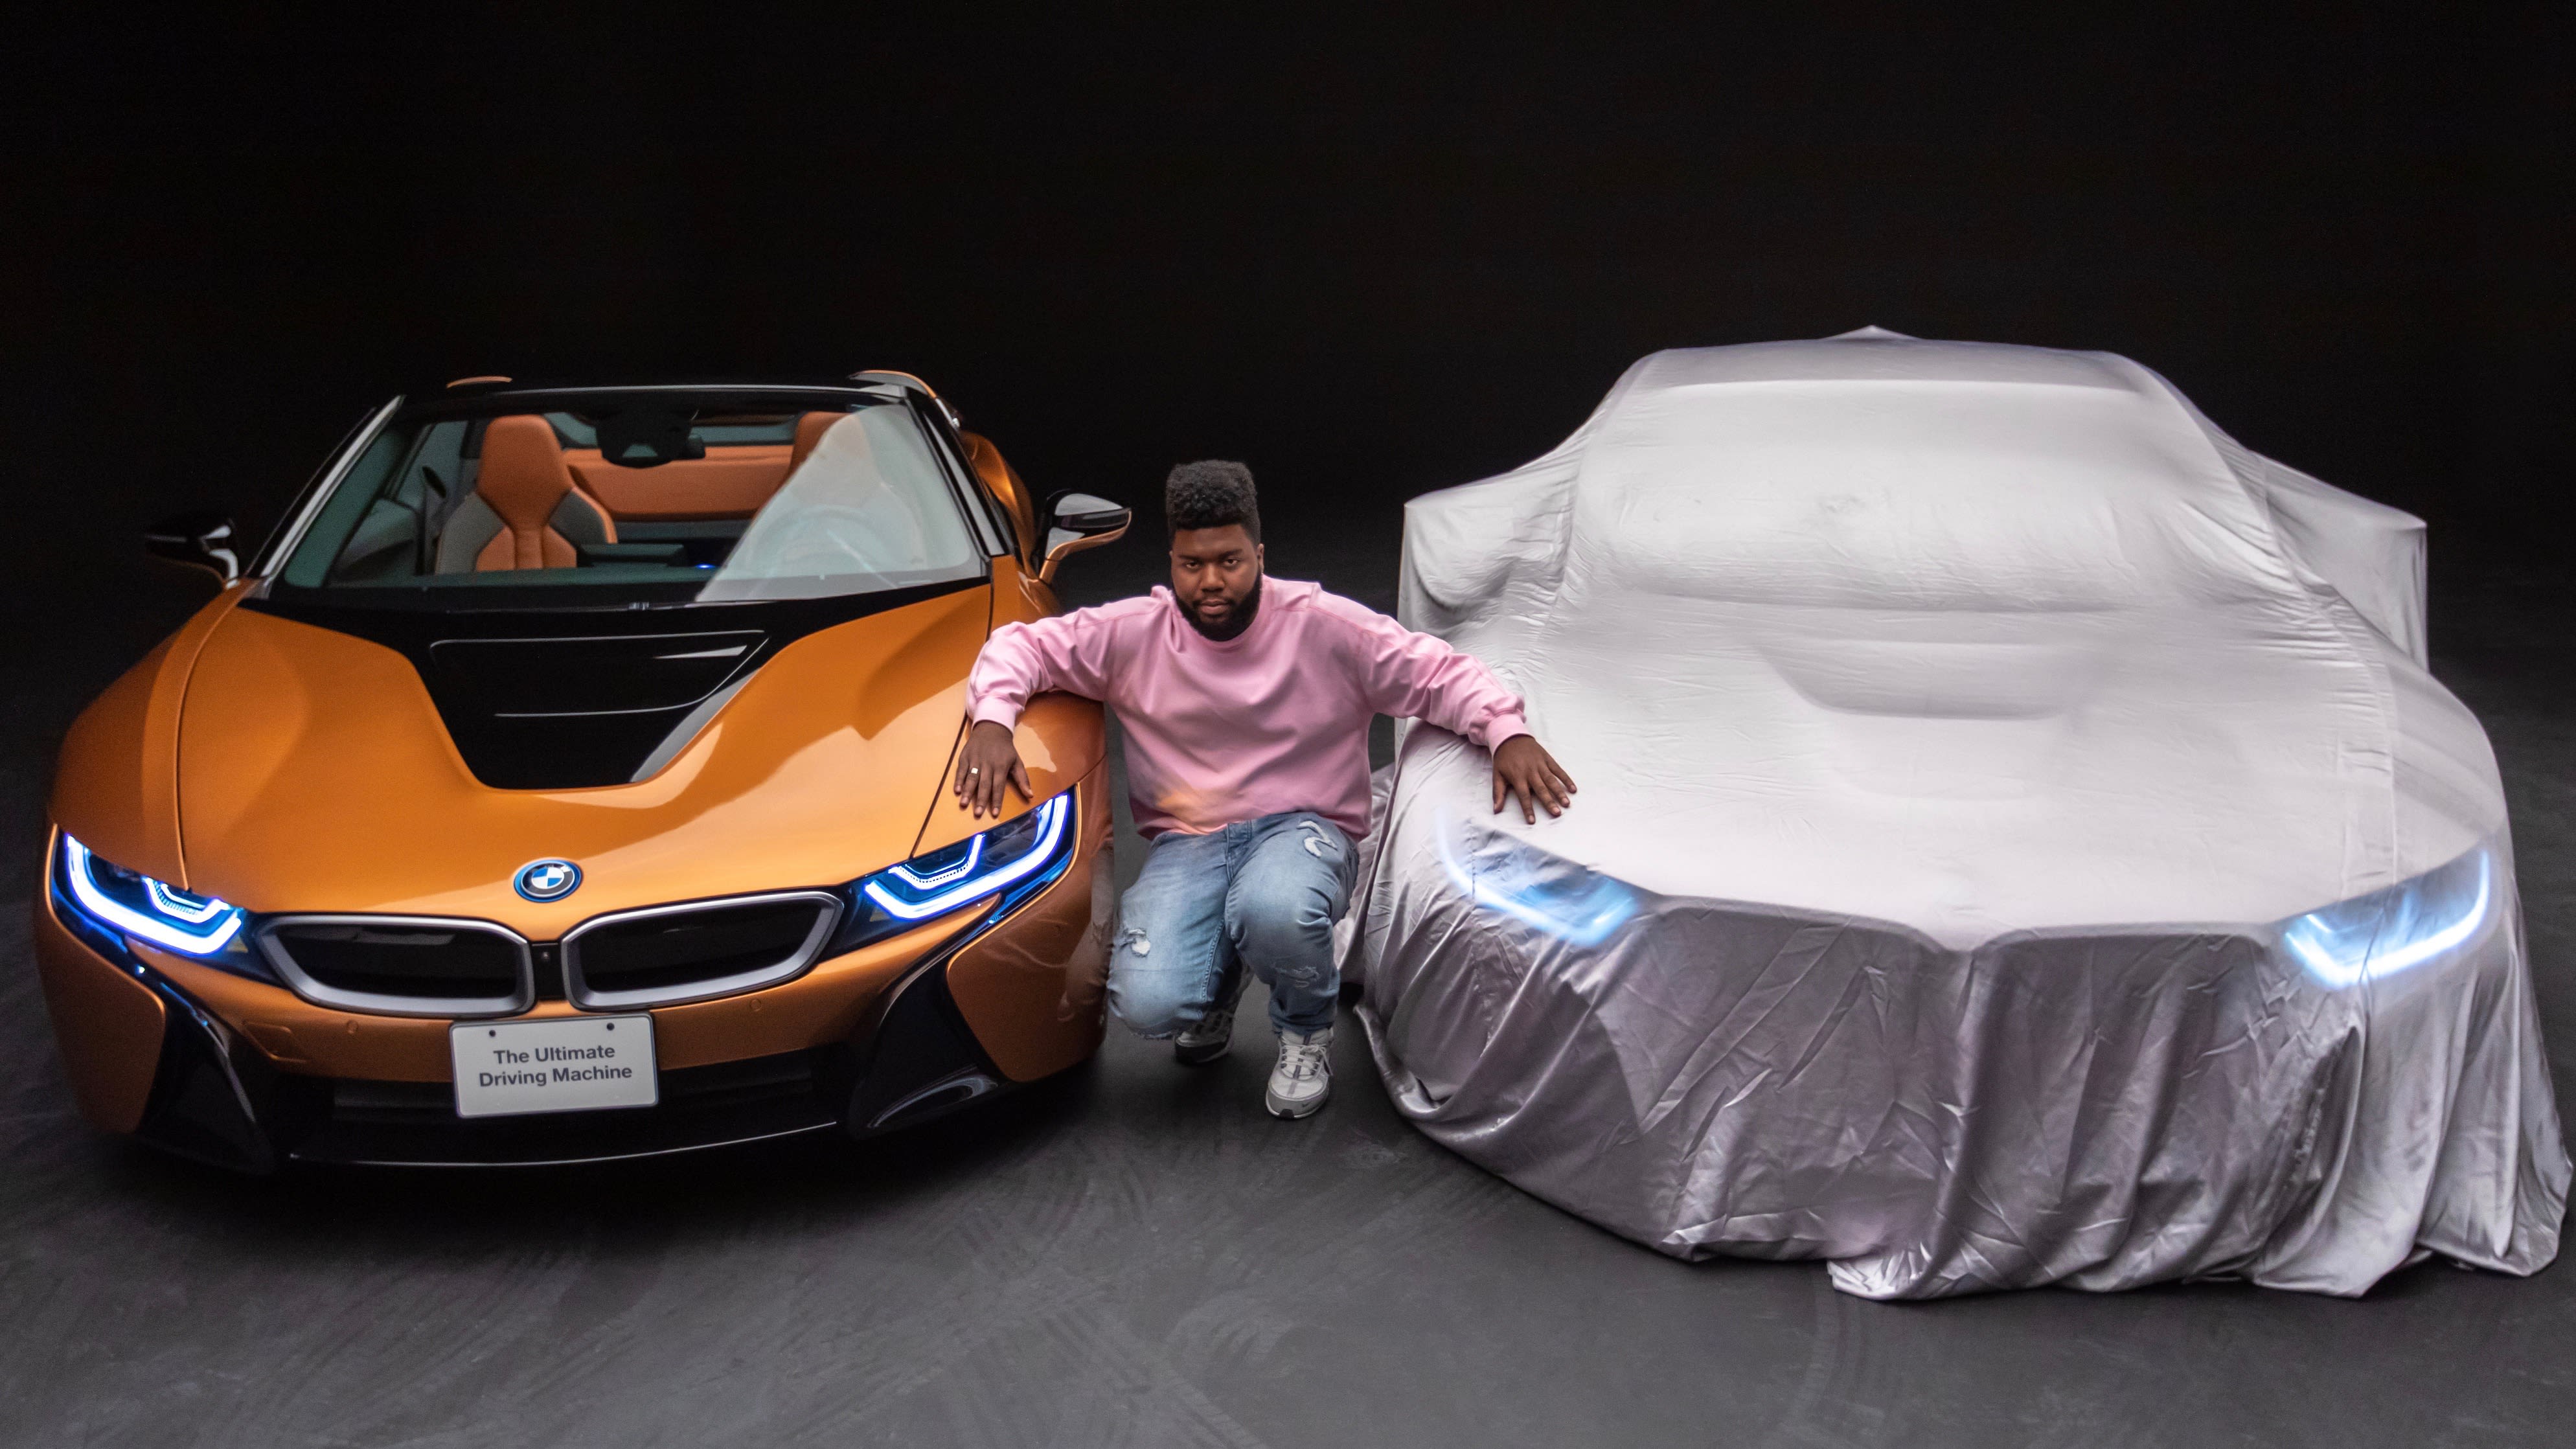 Khalid joins BMW 'Road to Coachella' - Car News | CarsGuide